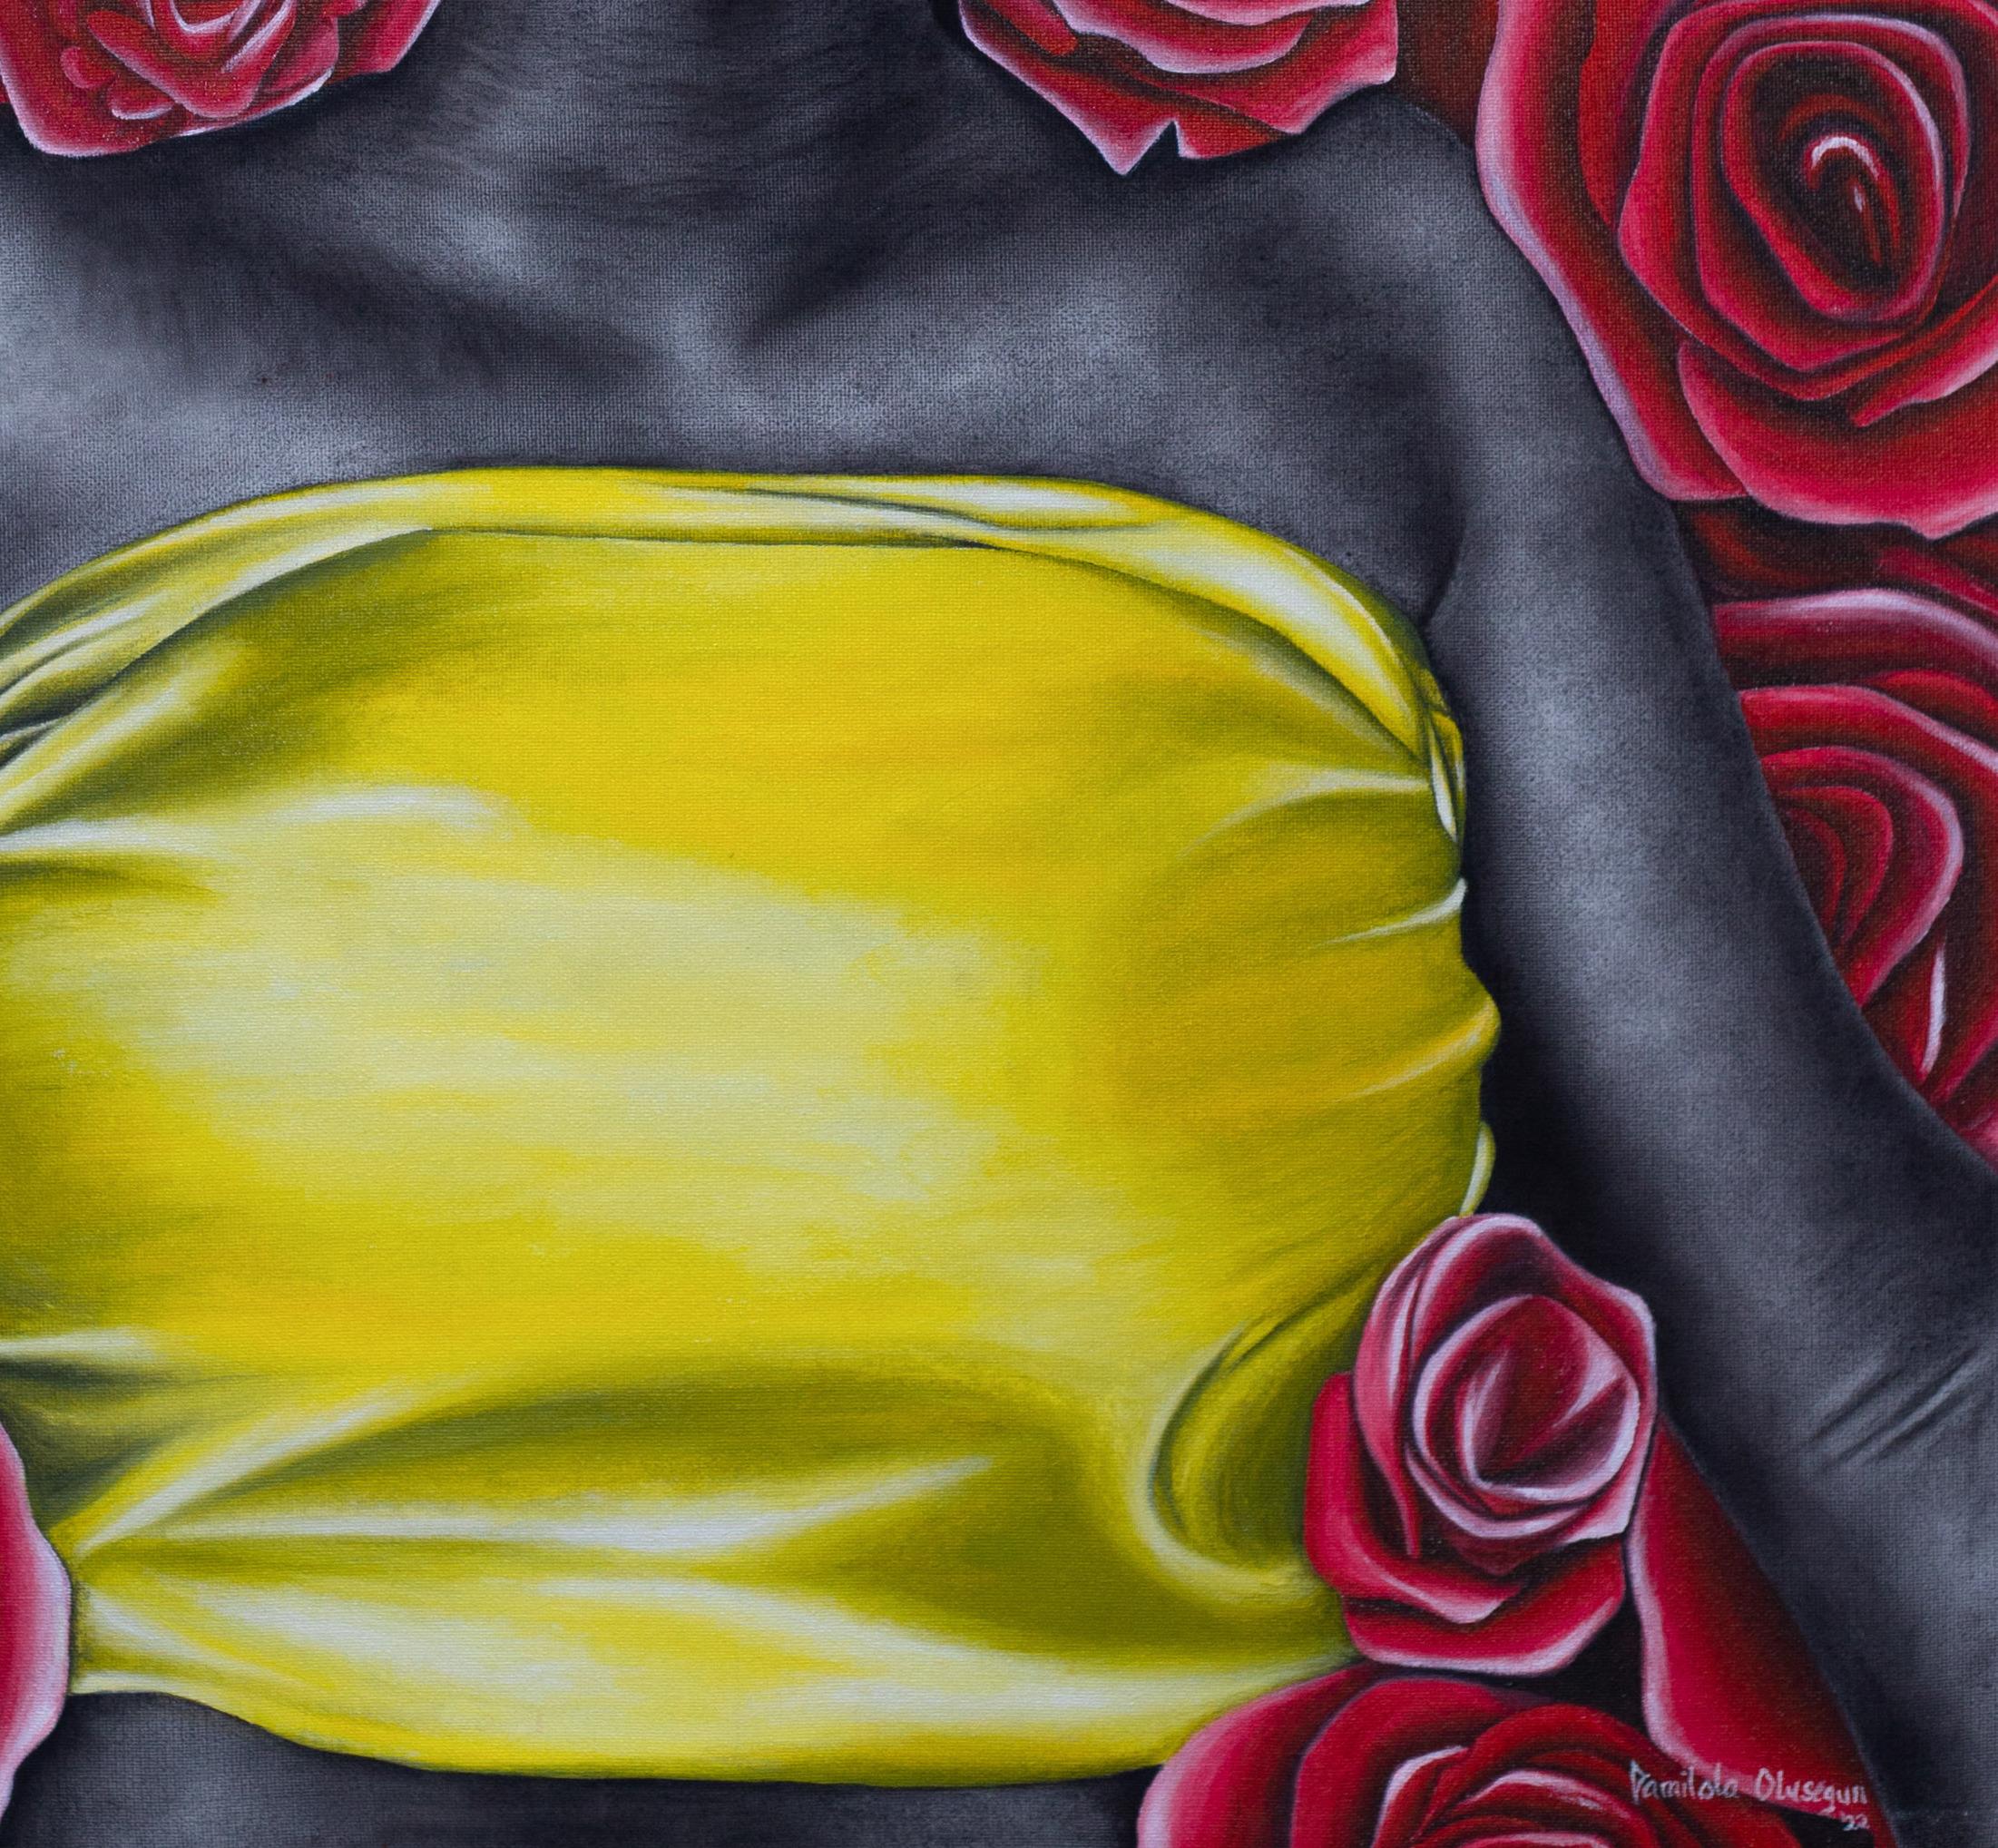 Bed of Roses - Expressionist Painting by Damilola Olusegun